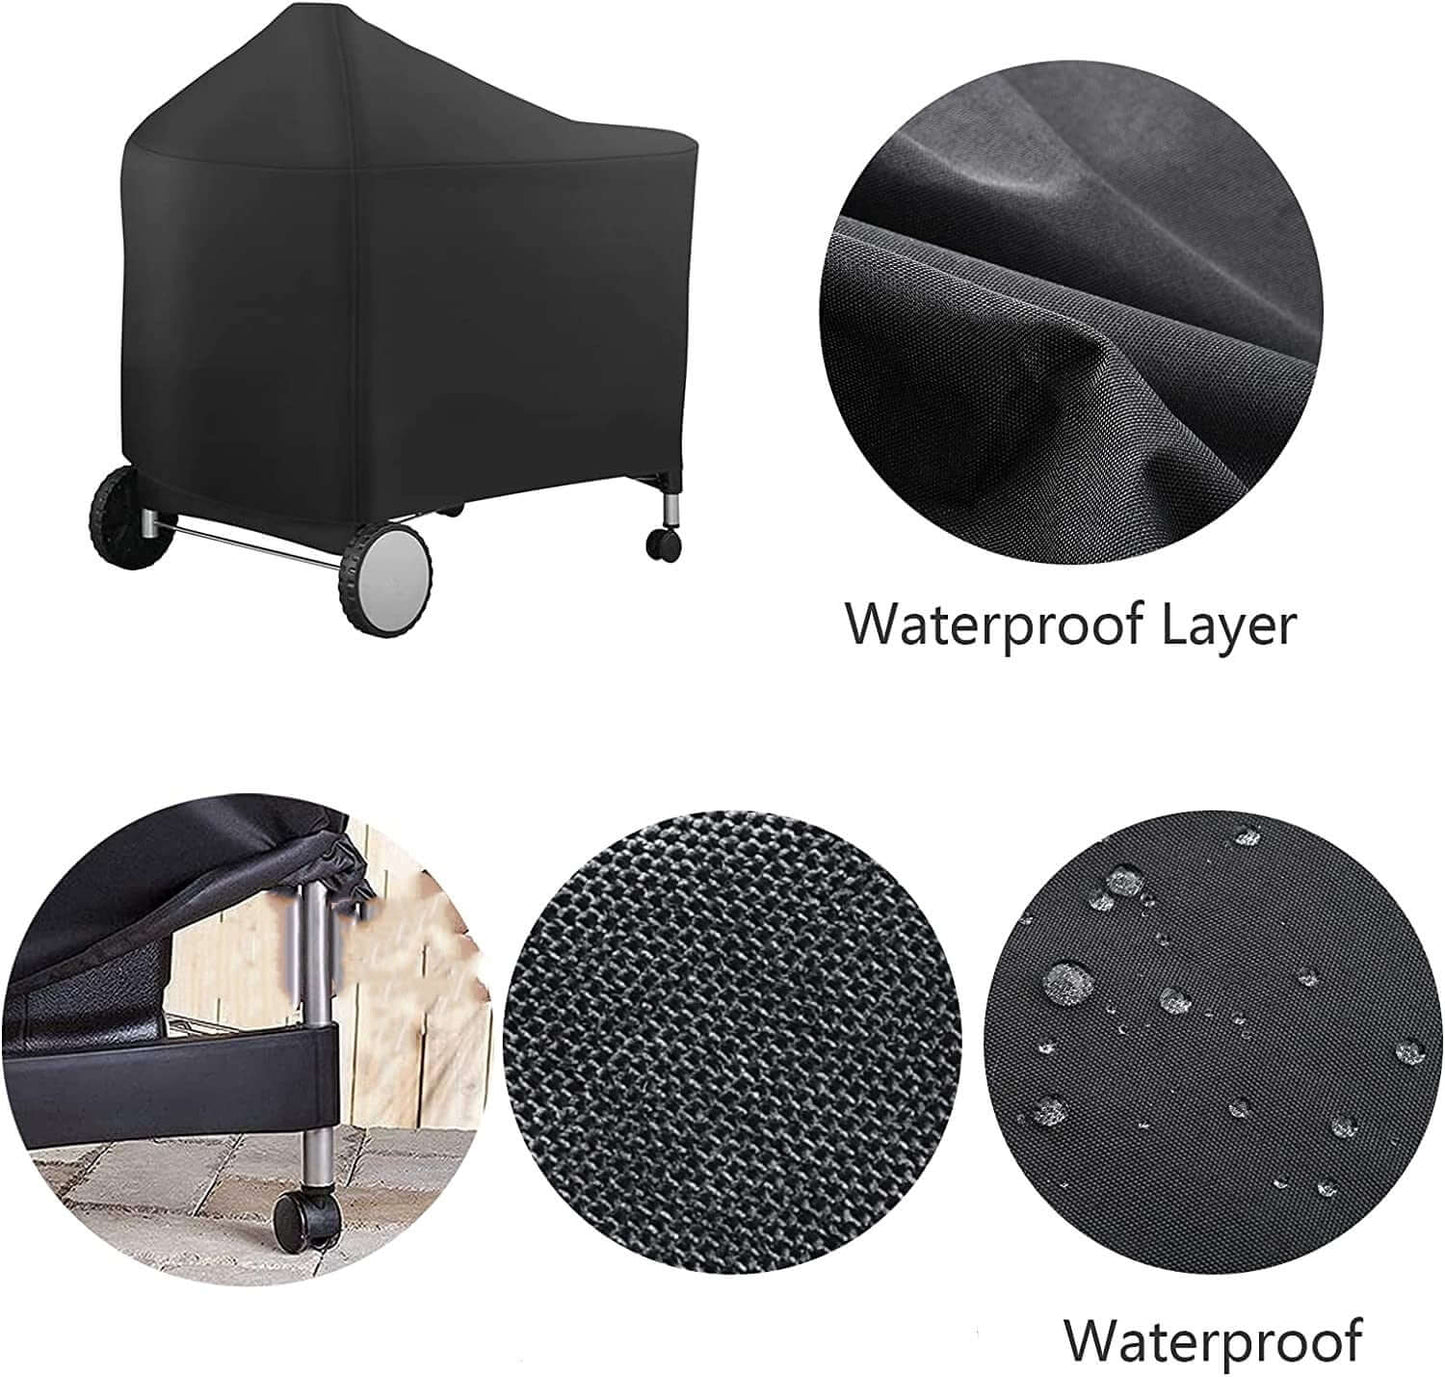 Anti-Dust BBQ Grill Cover For Weber 7152 Waterproof Charcoal Grills BBQ Covers Outdoor Camping Barbeque Cover Rain Protective